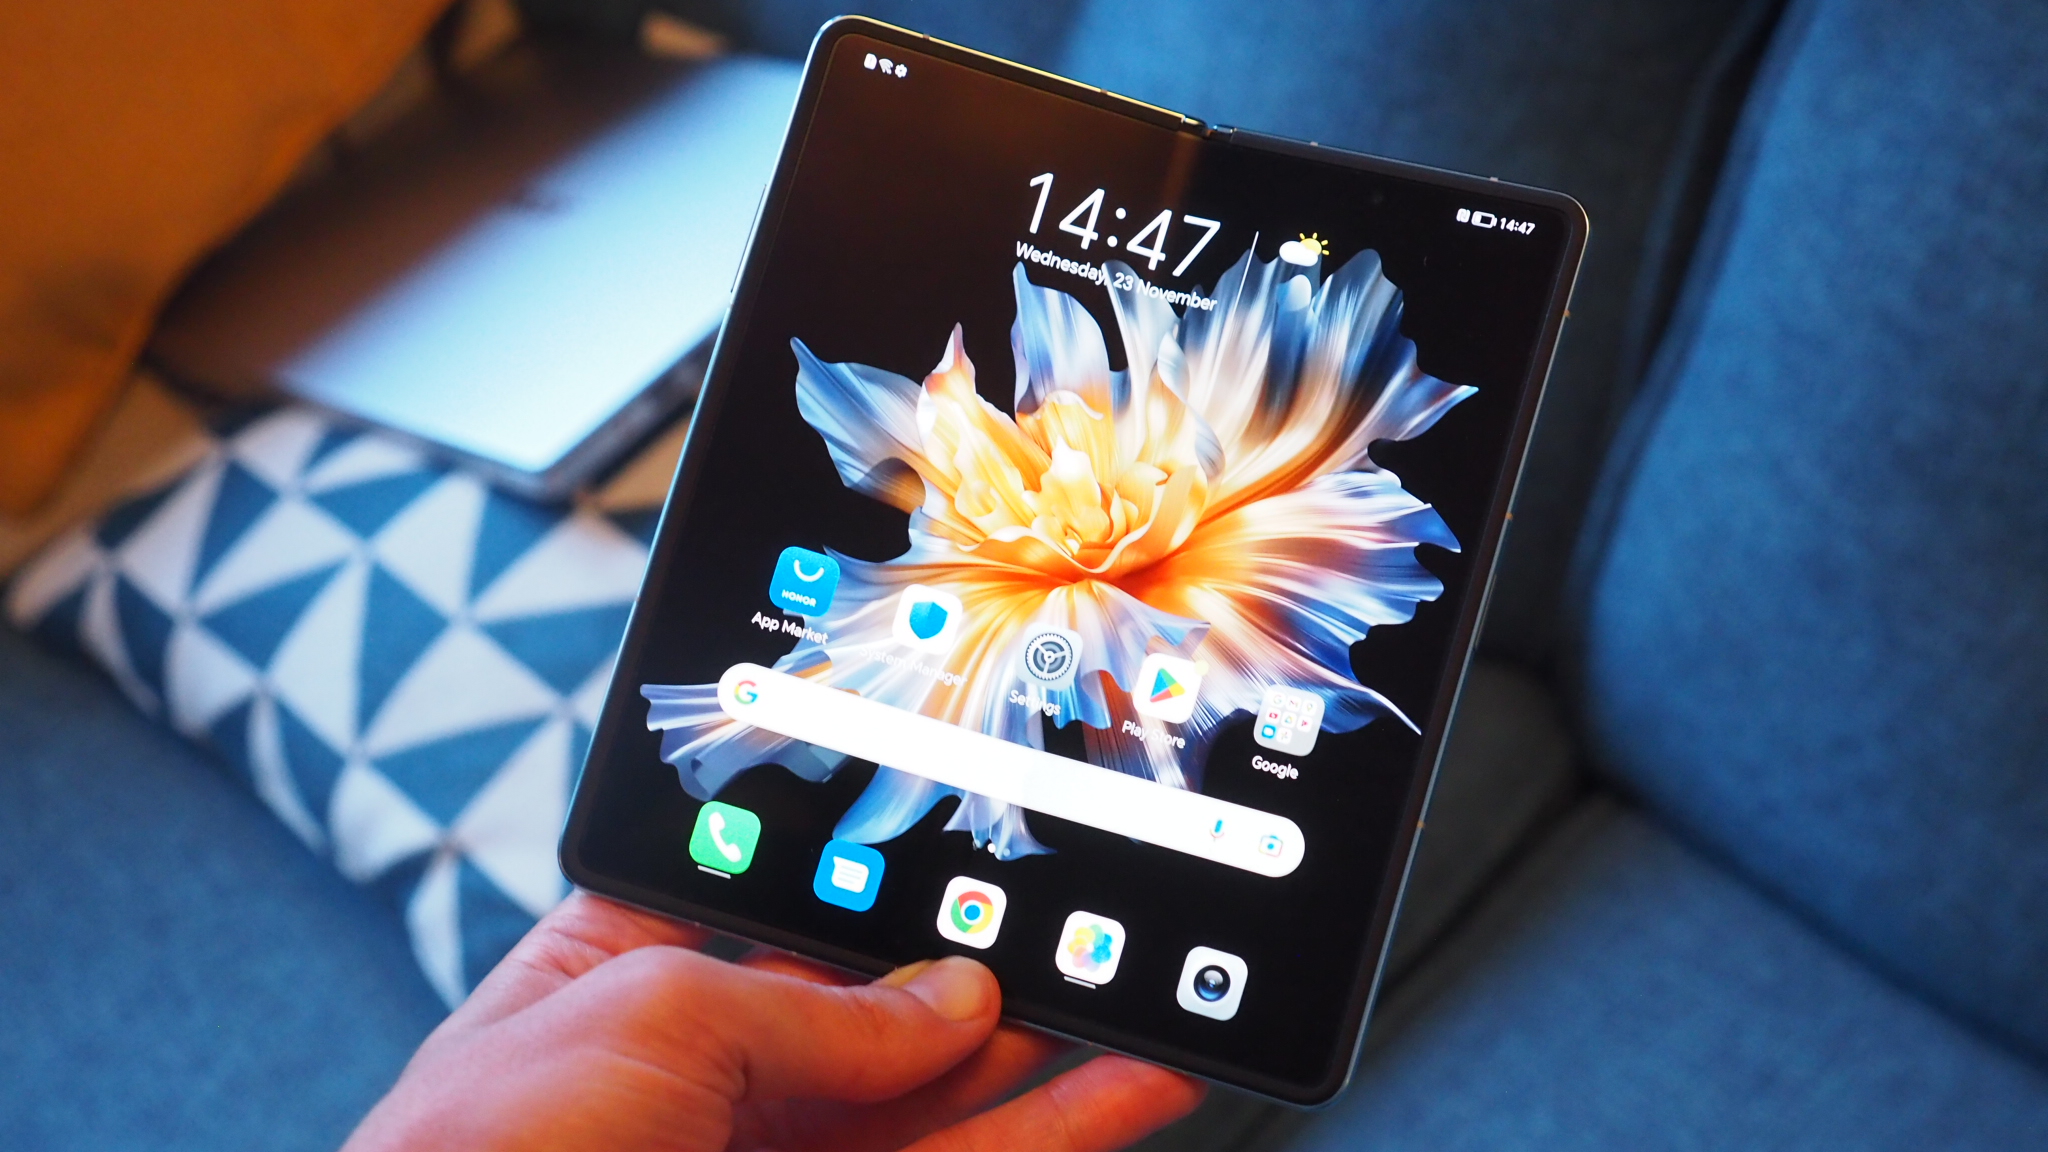 Honor V Purse vs Honor Magic V2: Which Foldable Phone is Best